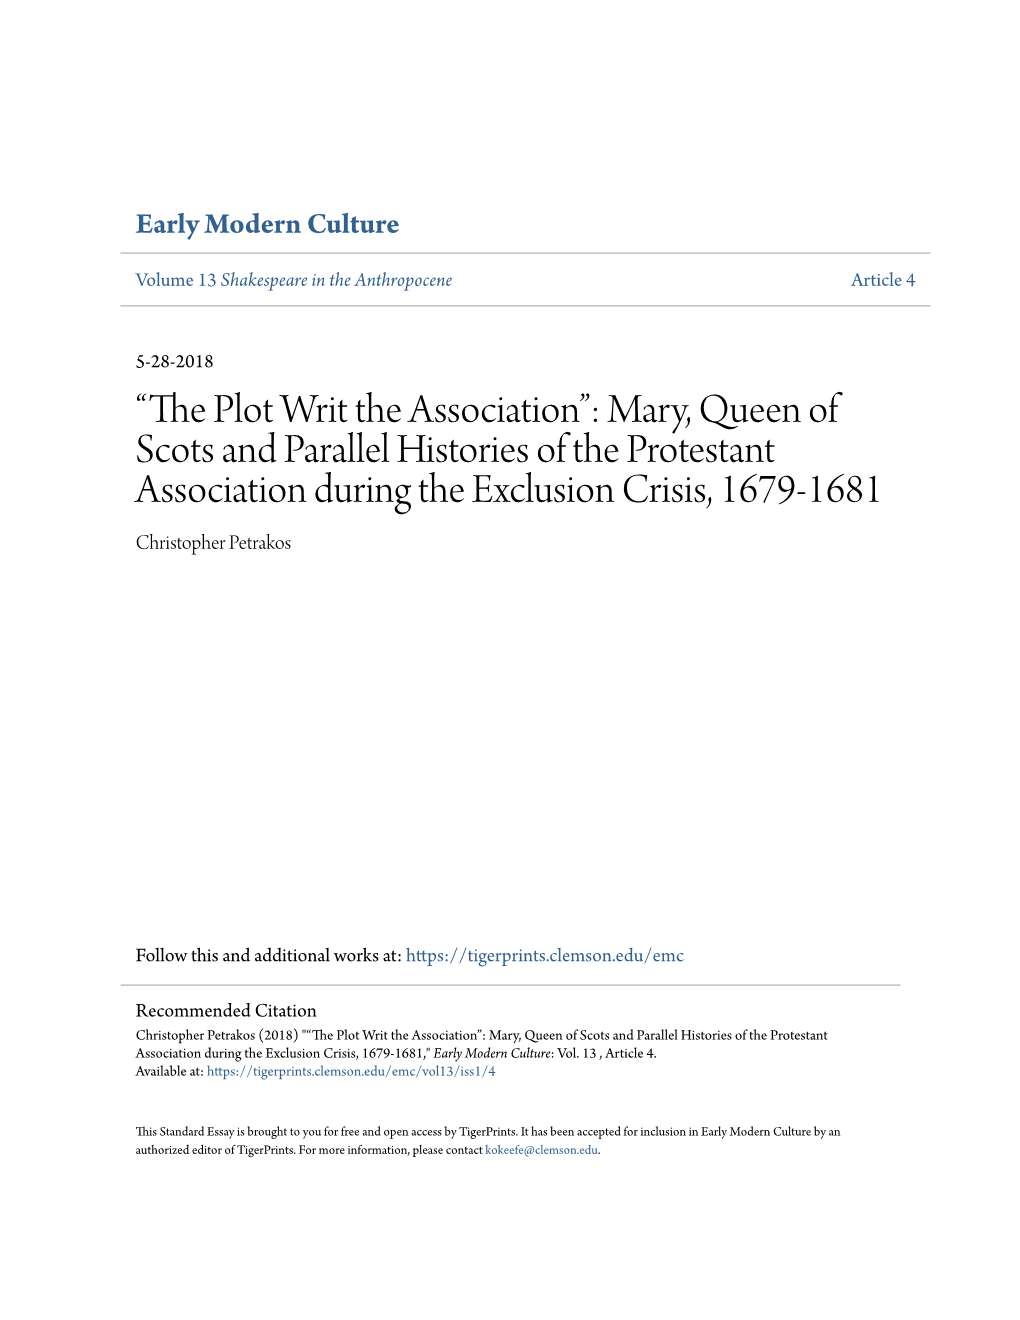 Mary, Queen of Scots and Parallel Histories of the Protestant Association During the Exclusion Crisis, 1679-1681 Christopher Petrakos